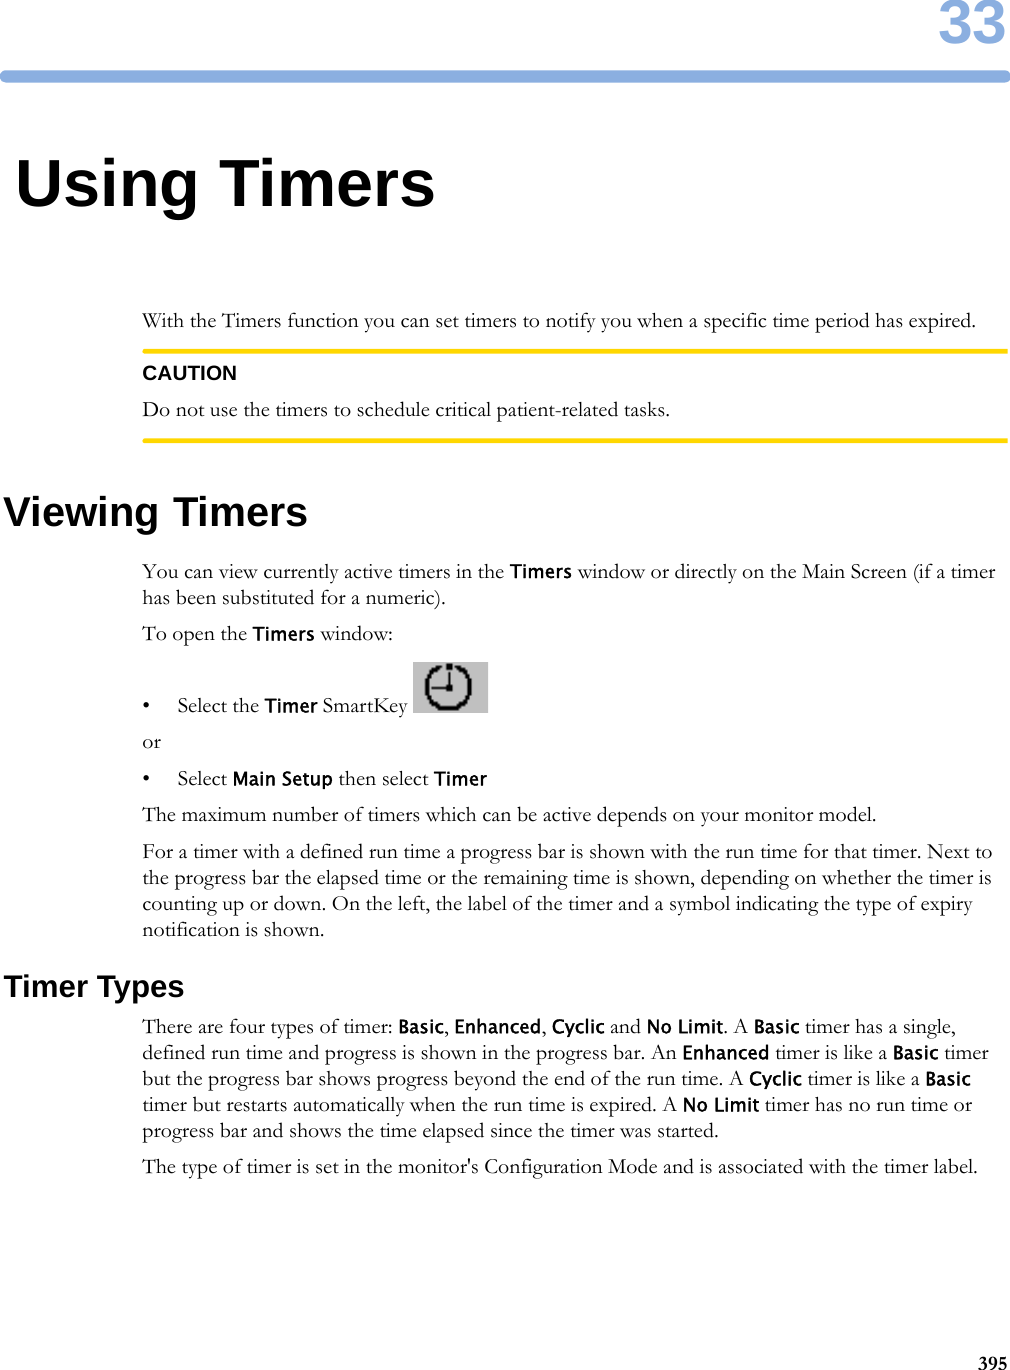 3339533Using TimersWith the Timers function you can set timers to notify you when a specific time period has expired.CAUTIONDo not use the timers to schedule critical patient-related tasks.Viewing TimersYou can view currently active timers in the Timers window or directly on the Main Screen (if a timer has been substituted for a numeric).To open the Timers window:• Select the Timer SmartKey or•Select Main Setup then select TimerThe maximum number of timers which can be active depends on your monitor model.For a timer with a defined run time a progress bar is shown with the run time for that timer. Next to the progress bar the elapsed time or the remaining time is shown, depending on whether the timer is counting up or down. On the left, the label of the timer and a symbol indicating the type of expiry notification is shown.Timer TypesThere are four types of timer: Basic, Enhanced, Cyclic and No Limit. A Basic timer has a single, defined run time and progress is shown in the progress bar. An Enhanced timer is like a Basic timer but the progress bar shows progress beyond the end of the run time. A Cyclic timer is like a Basic timer but restarts automatically when the run time is expired. A No Limit timer has no run time or progress bar and shows the time elapsed since the timer was started.The type of timer is set in the monitor&apos;s Configuration Mode and is associated with the timer label.